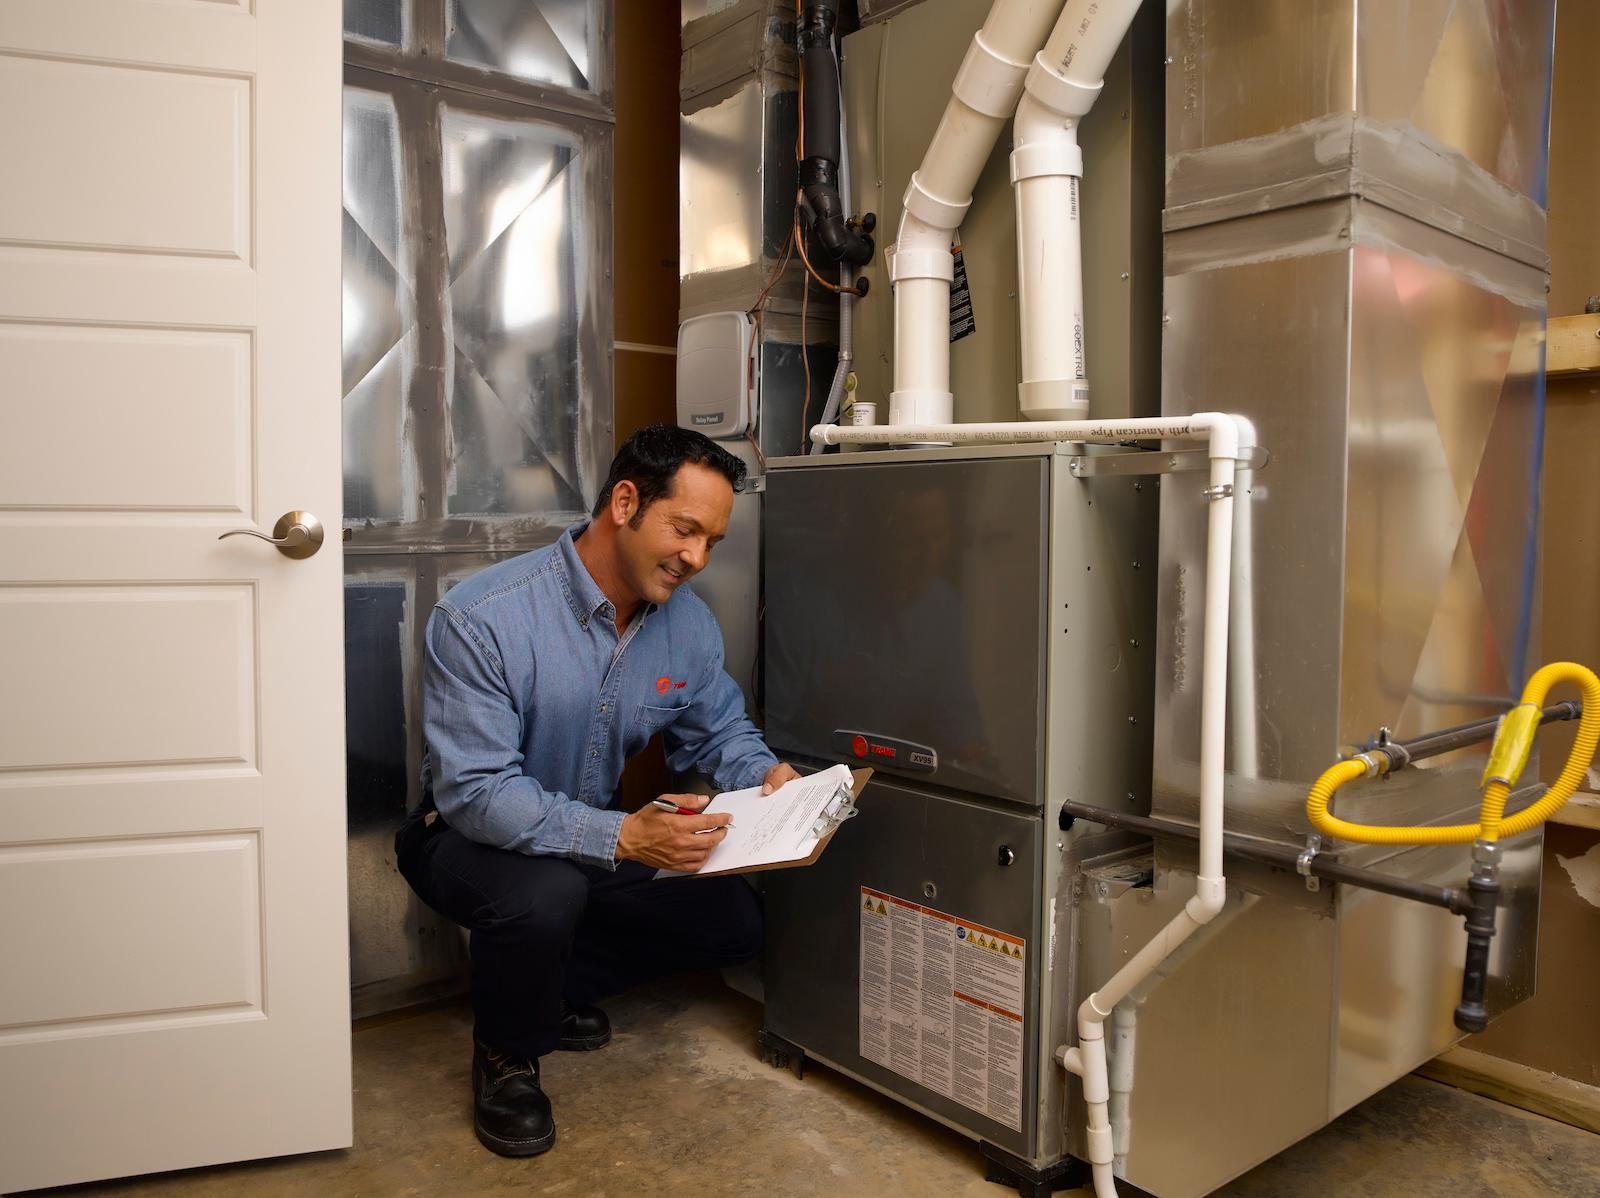 5 Common Myths About Home Furnaces That Aren’t True